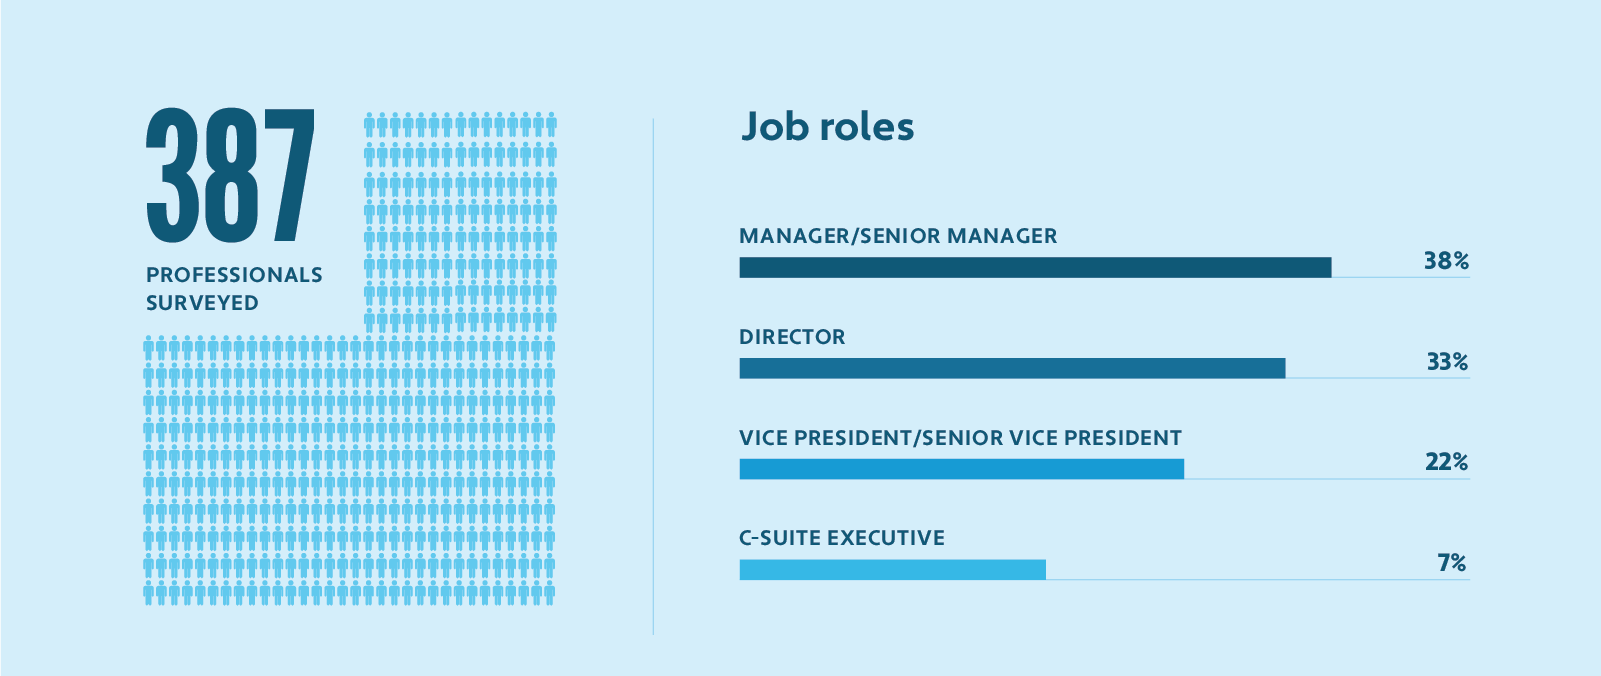 percentage of surveyed professionals in job roles: manager 38%, director 33%, VP 22%, C-suite executive 7%